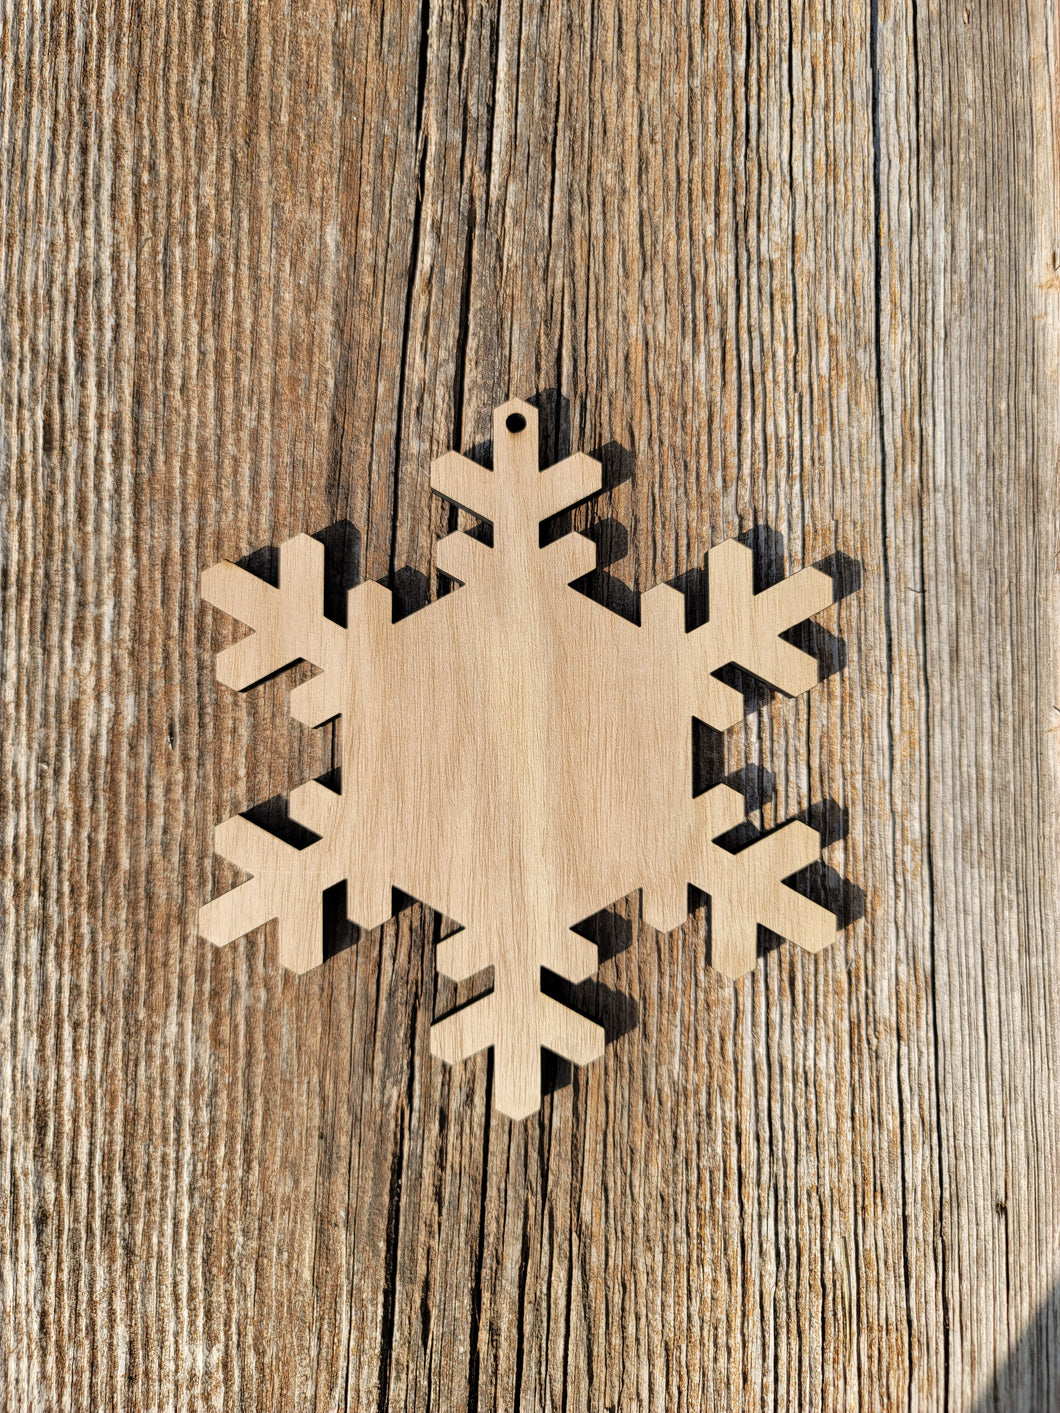 Snowflake Ornaments 6, 12, and 18 inch unpainted